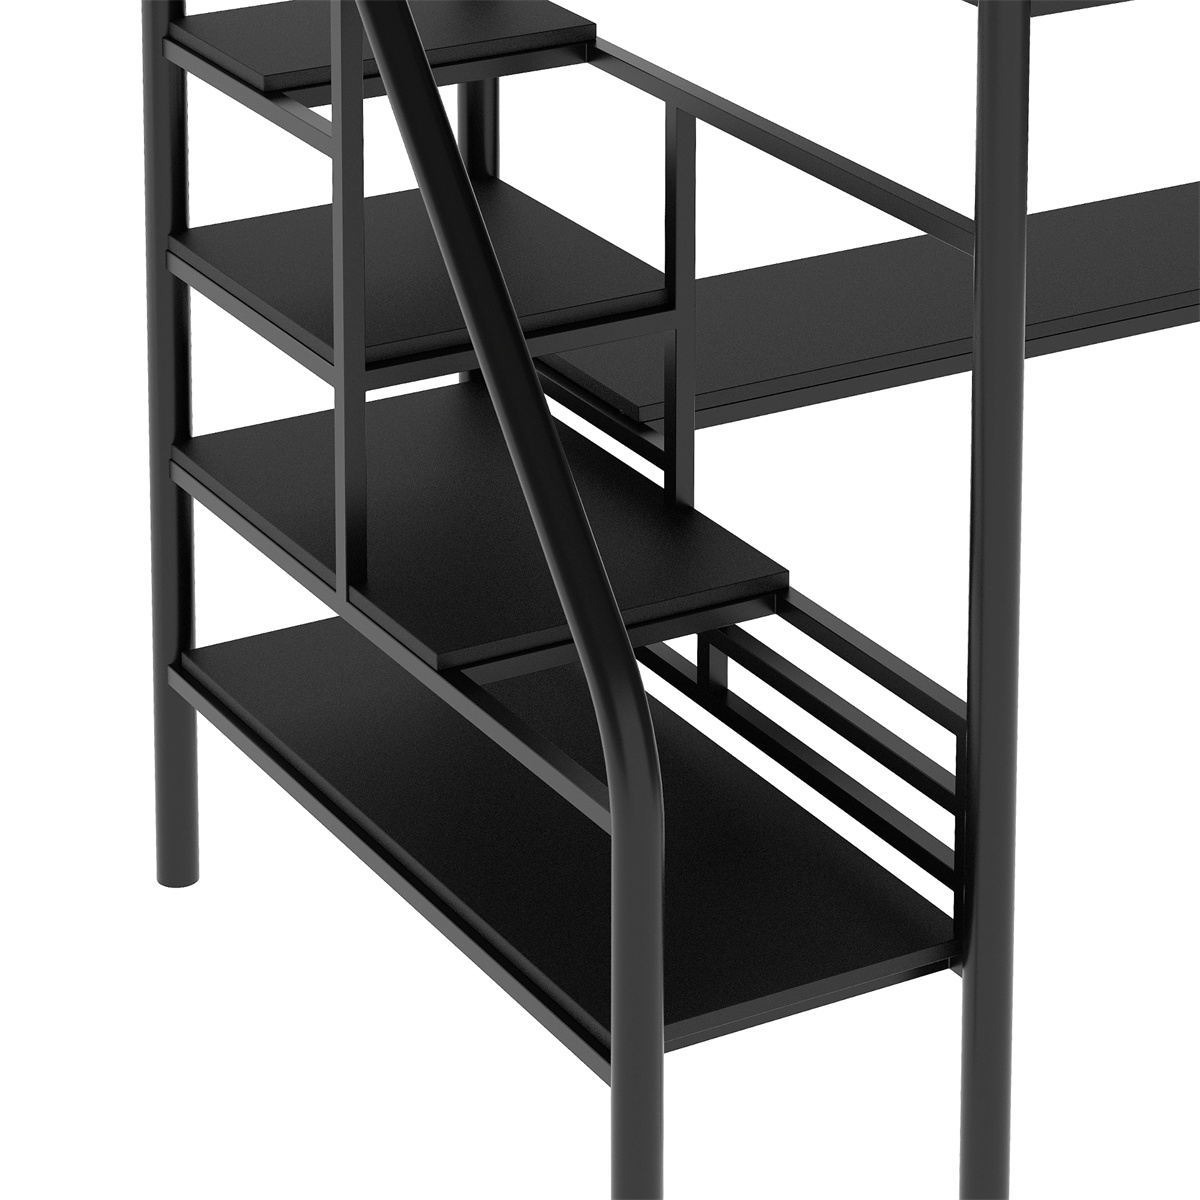 Metal Loft Bed, Twin Size Loft Bed Frame with Desk for Kids Teens Boys Girls, Noise Free Loft Bed with Stairs and Safety Guardrail for Bedroom, Space-Saving Design, No Box Spring Needed, Black - image 7 of 7